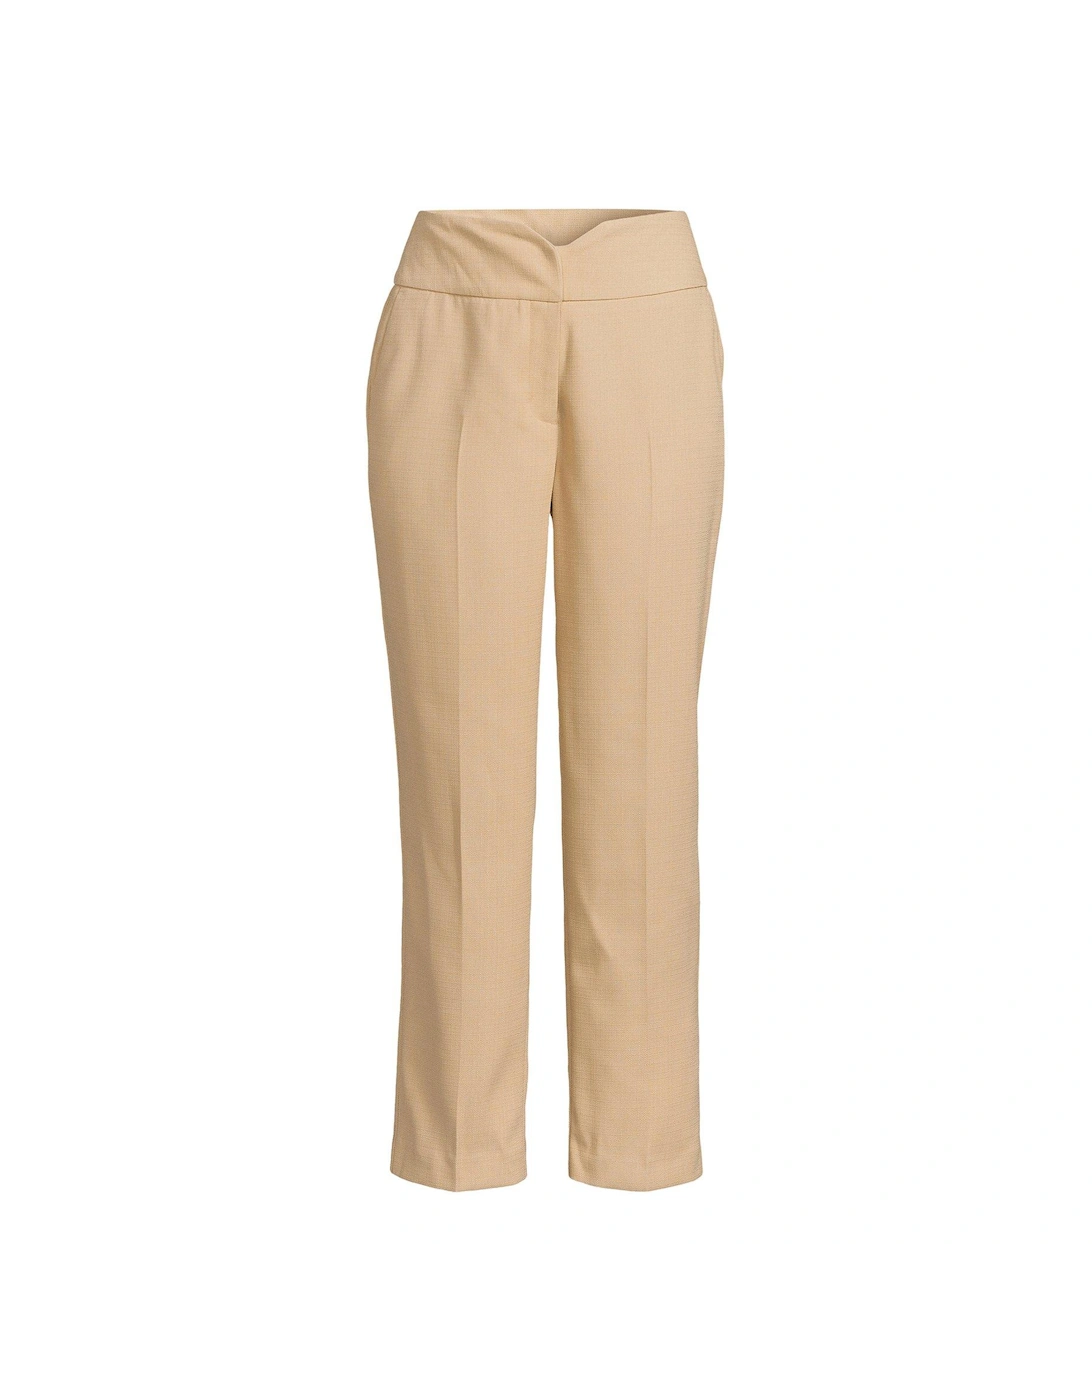 Tailored Co-ord Trousers - Camel